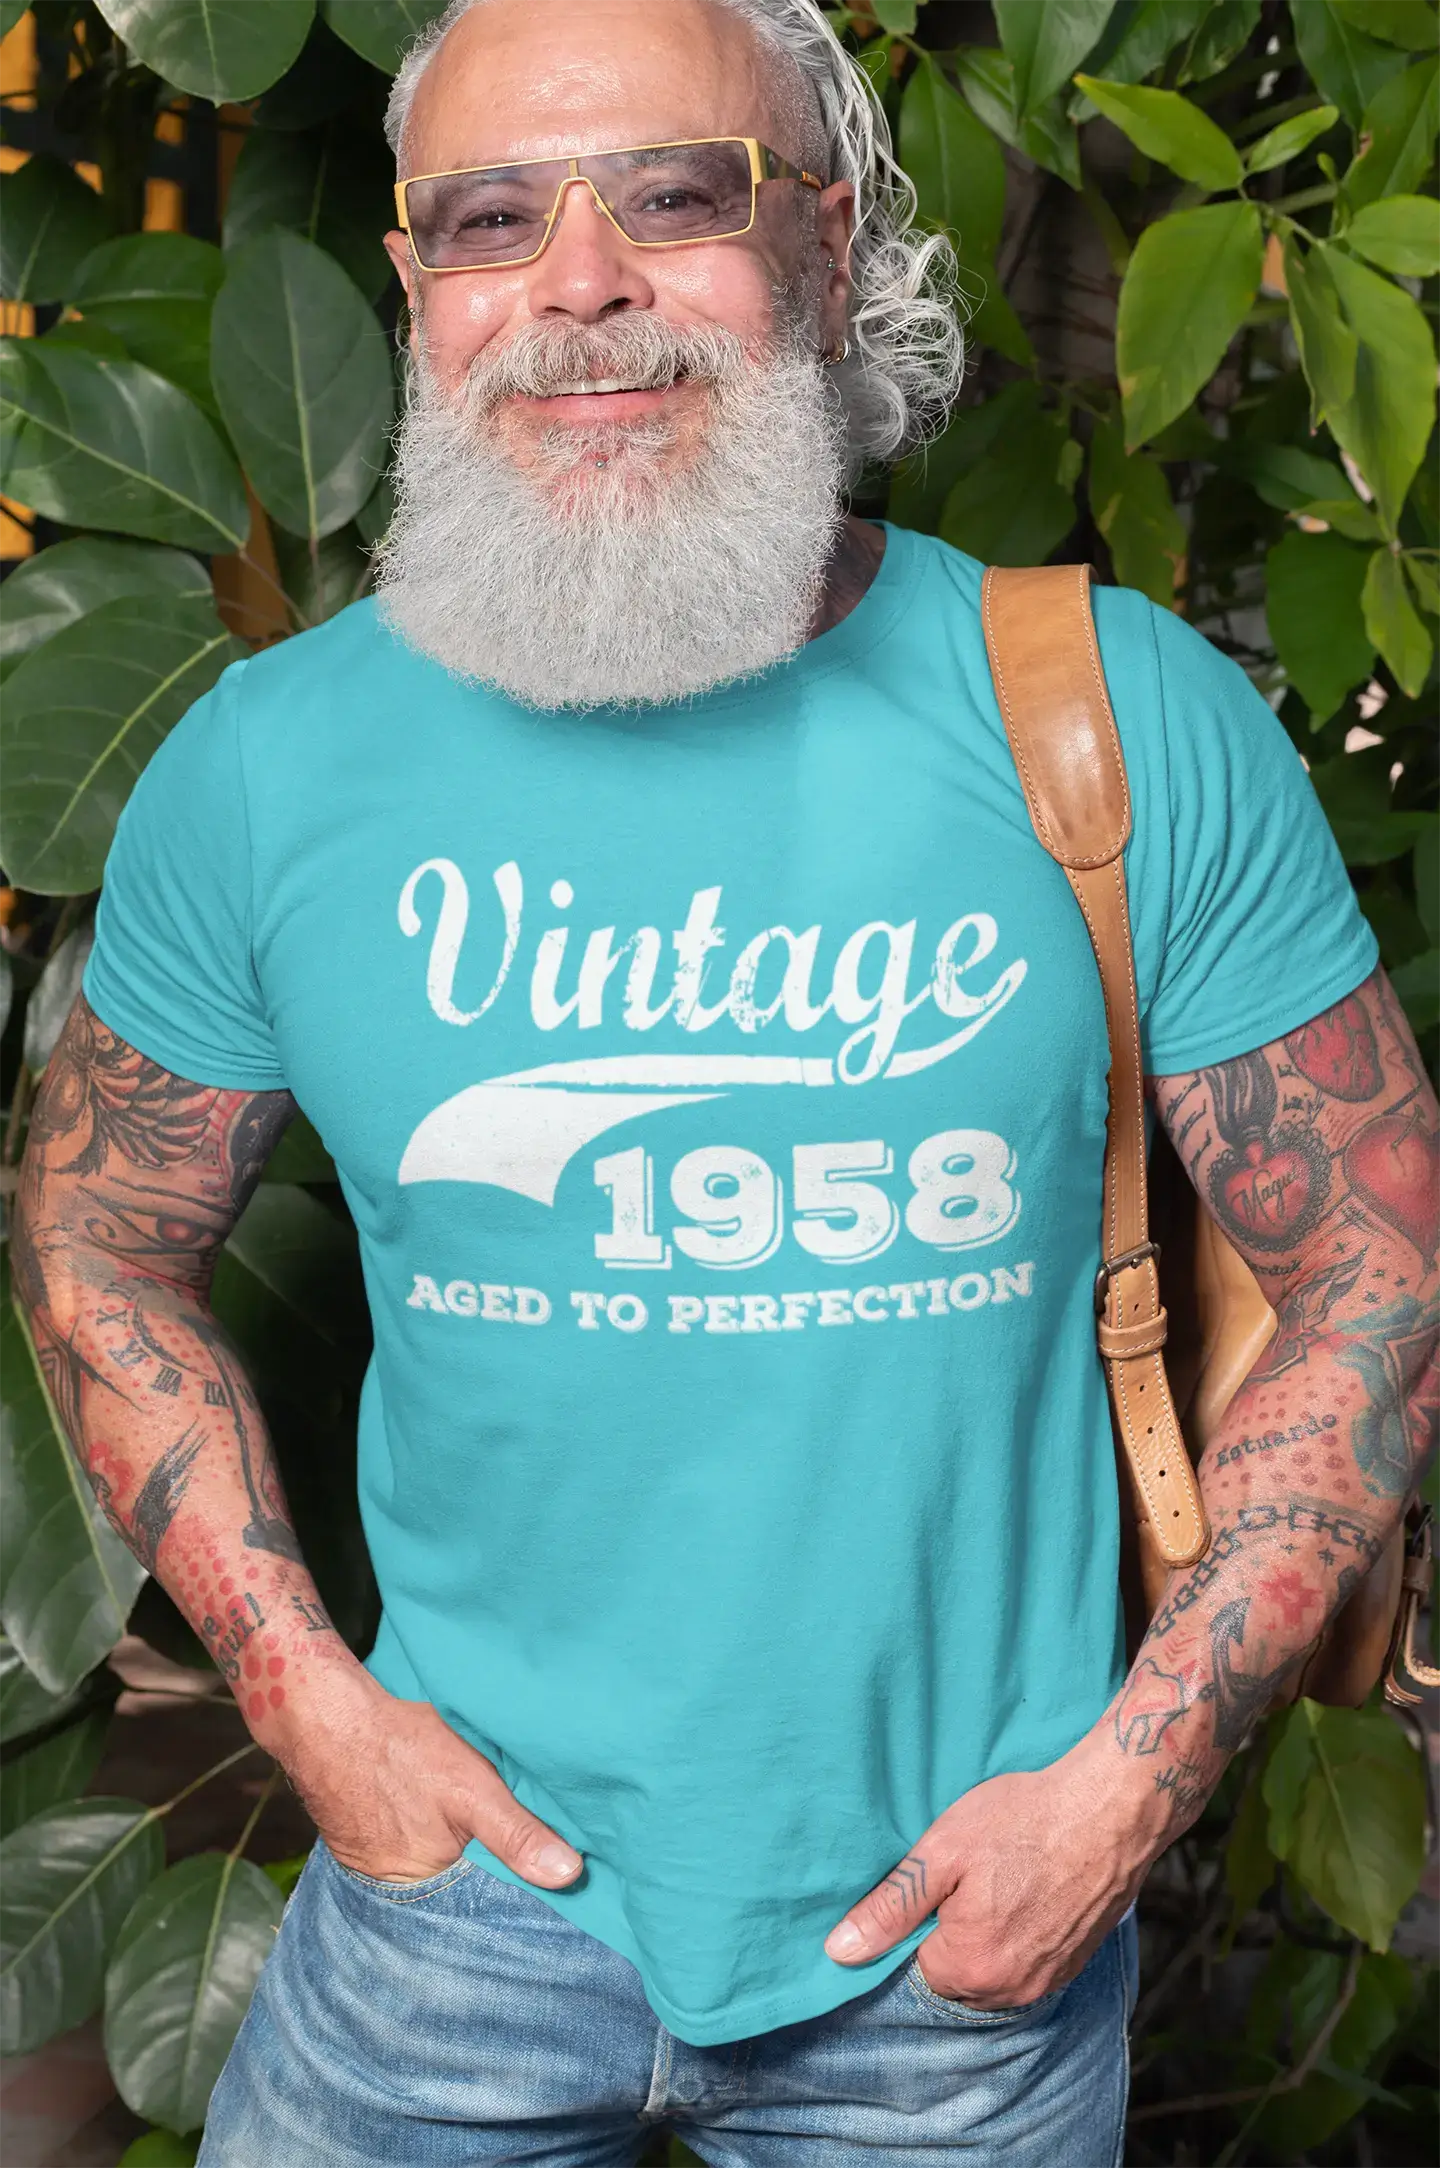 1958 Vintage Aged to Perfection, Blue, Men's Short Sleeve Round Neck T-shirt 00291